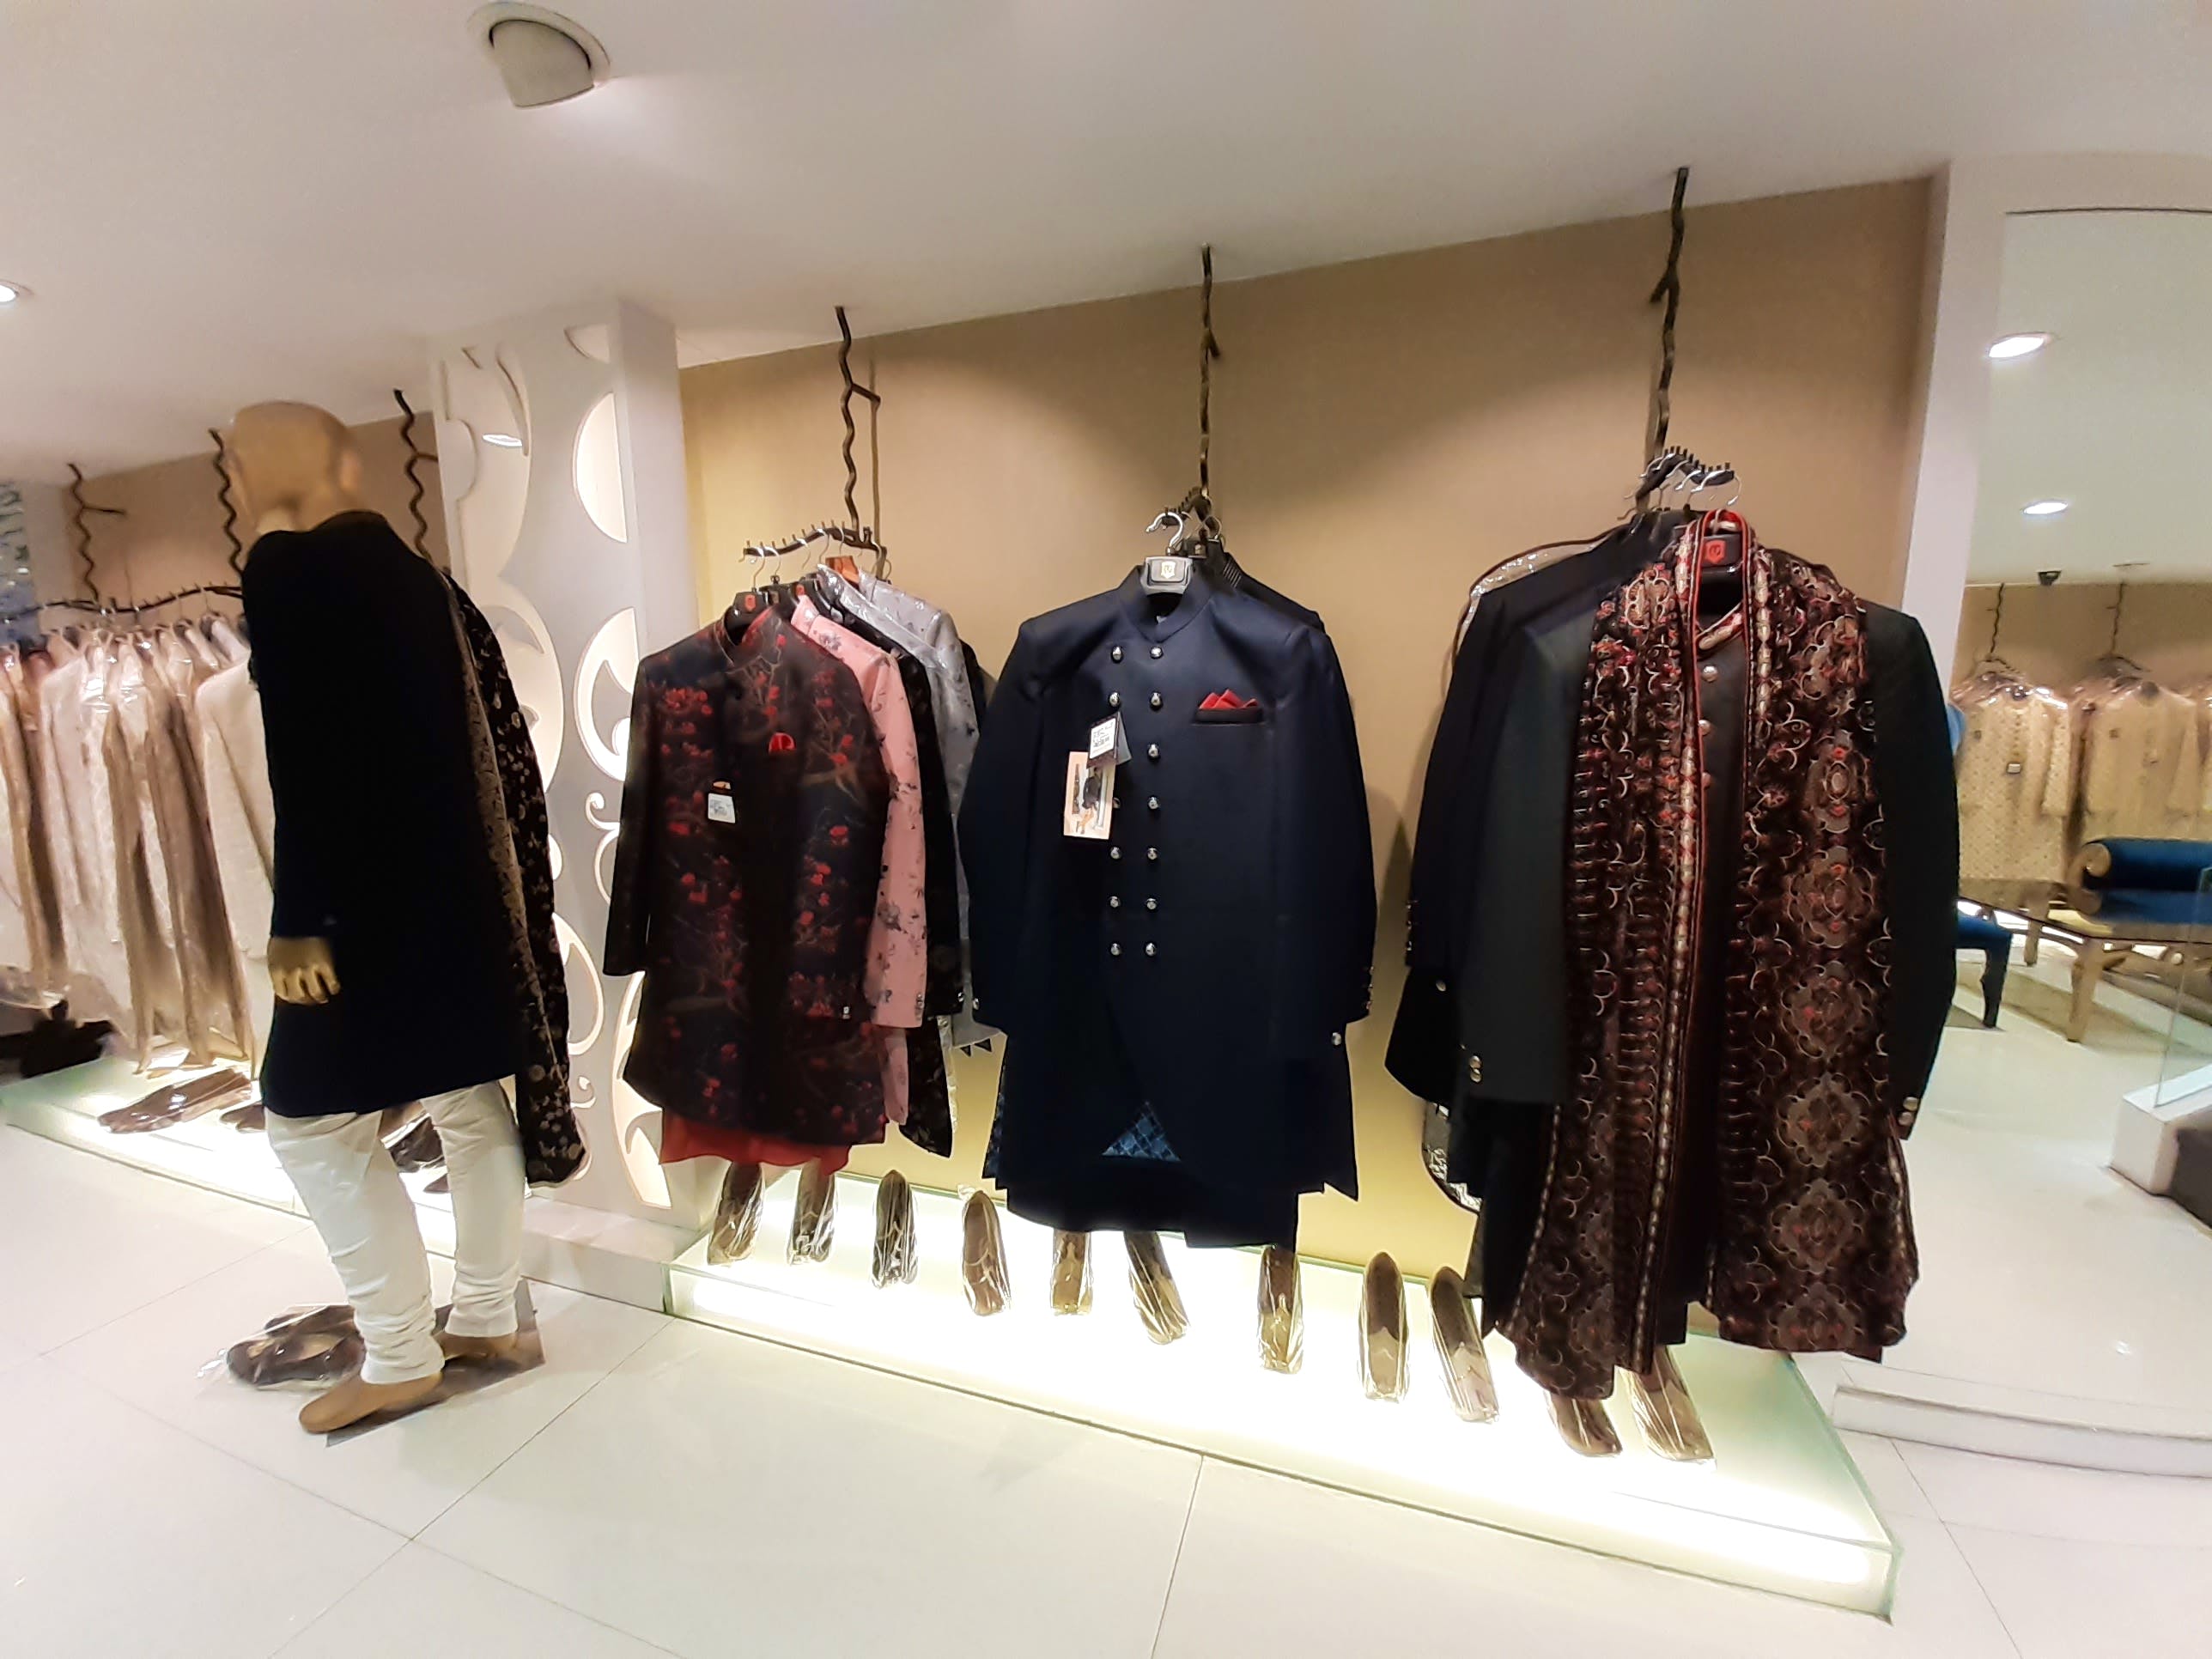 Boutique,Fashion,Outerwear,Clothes hanger,Fashion design,Display window,Footwear,Room,Retail,Collection